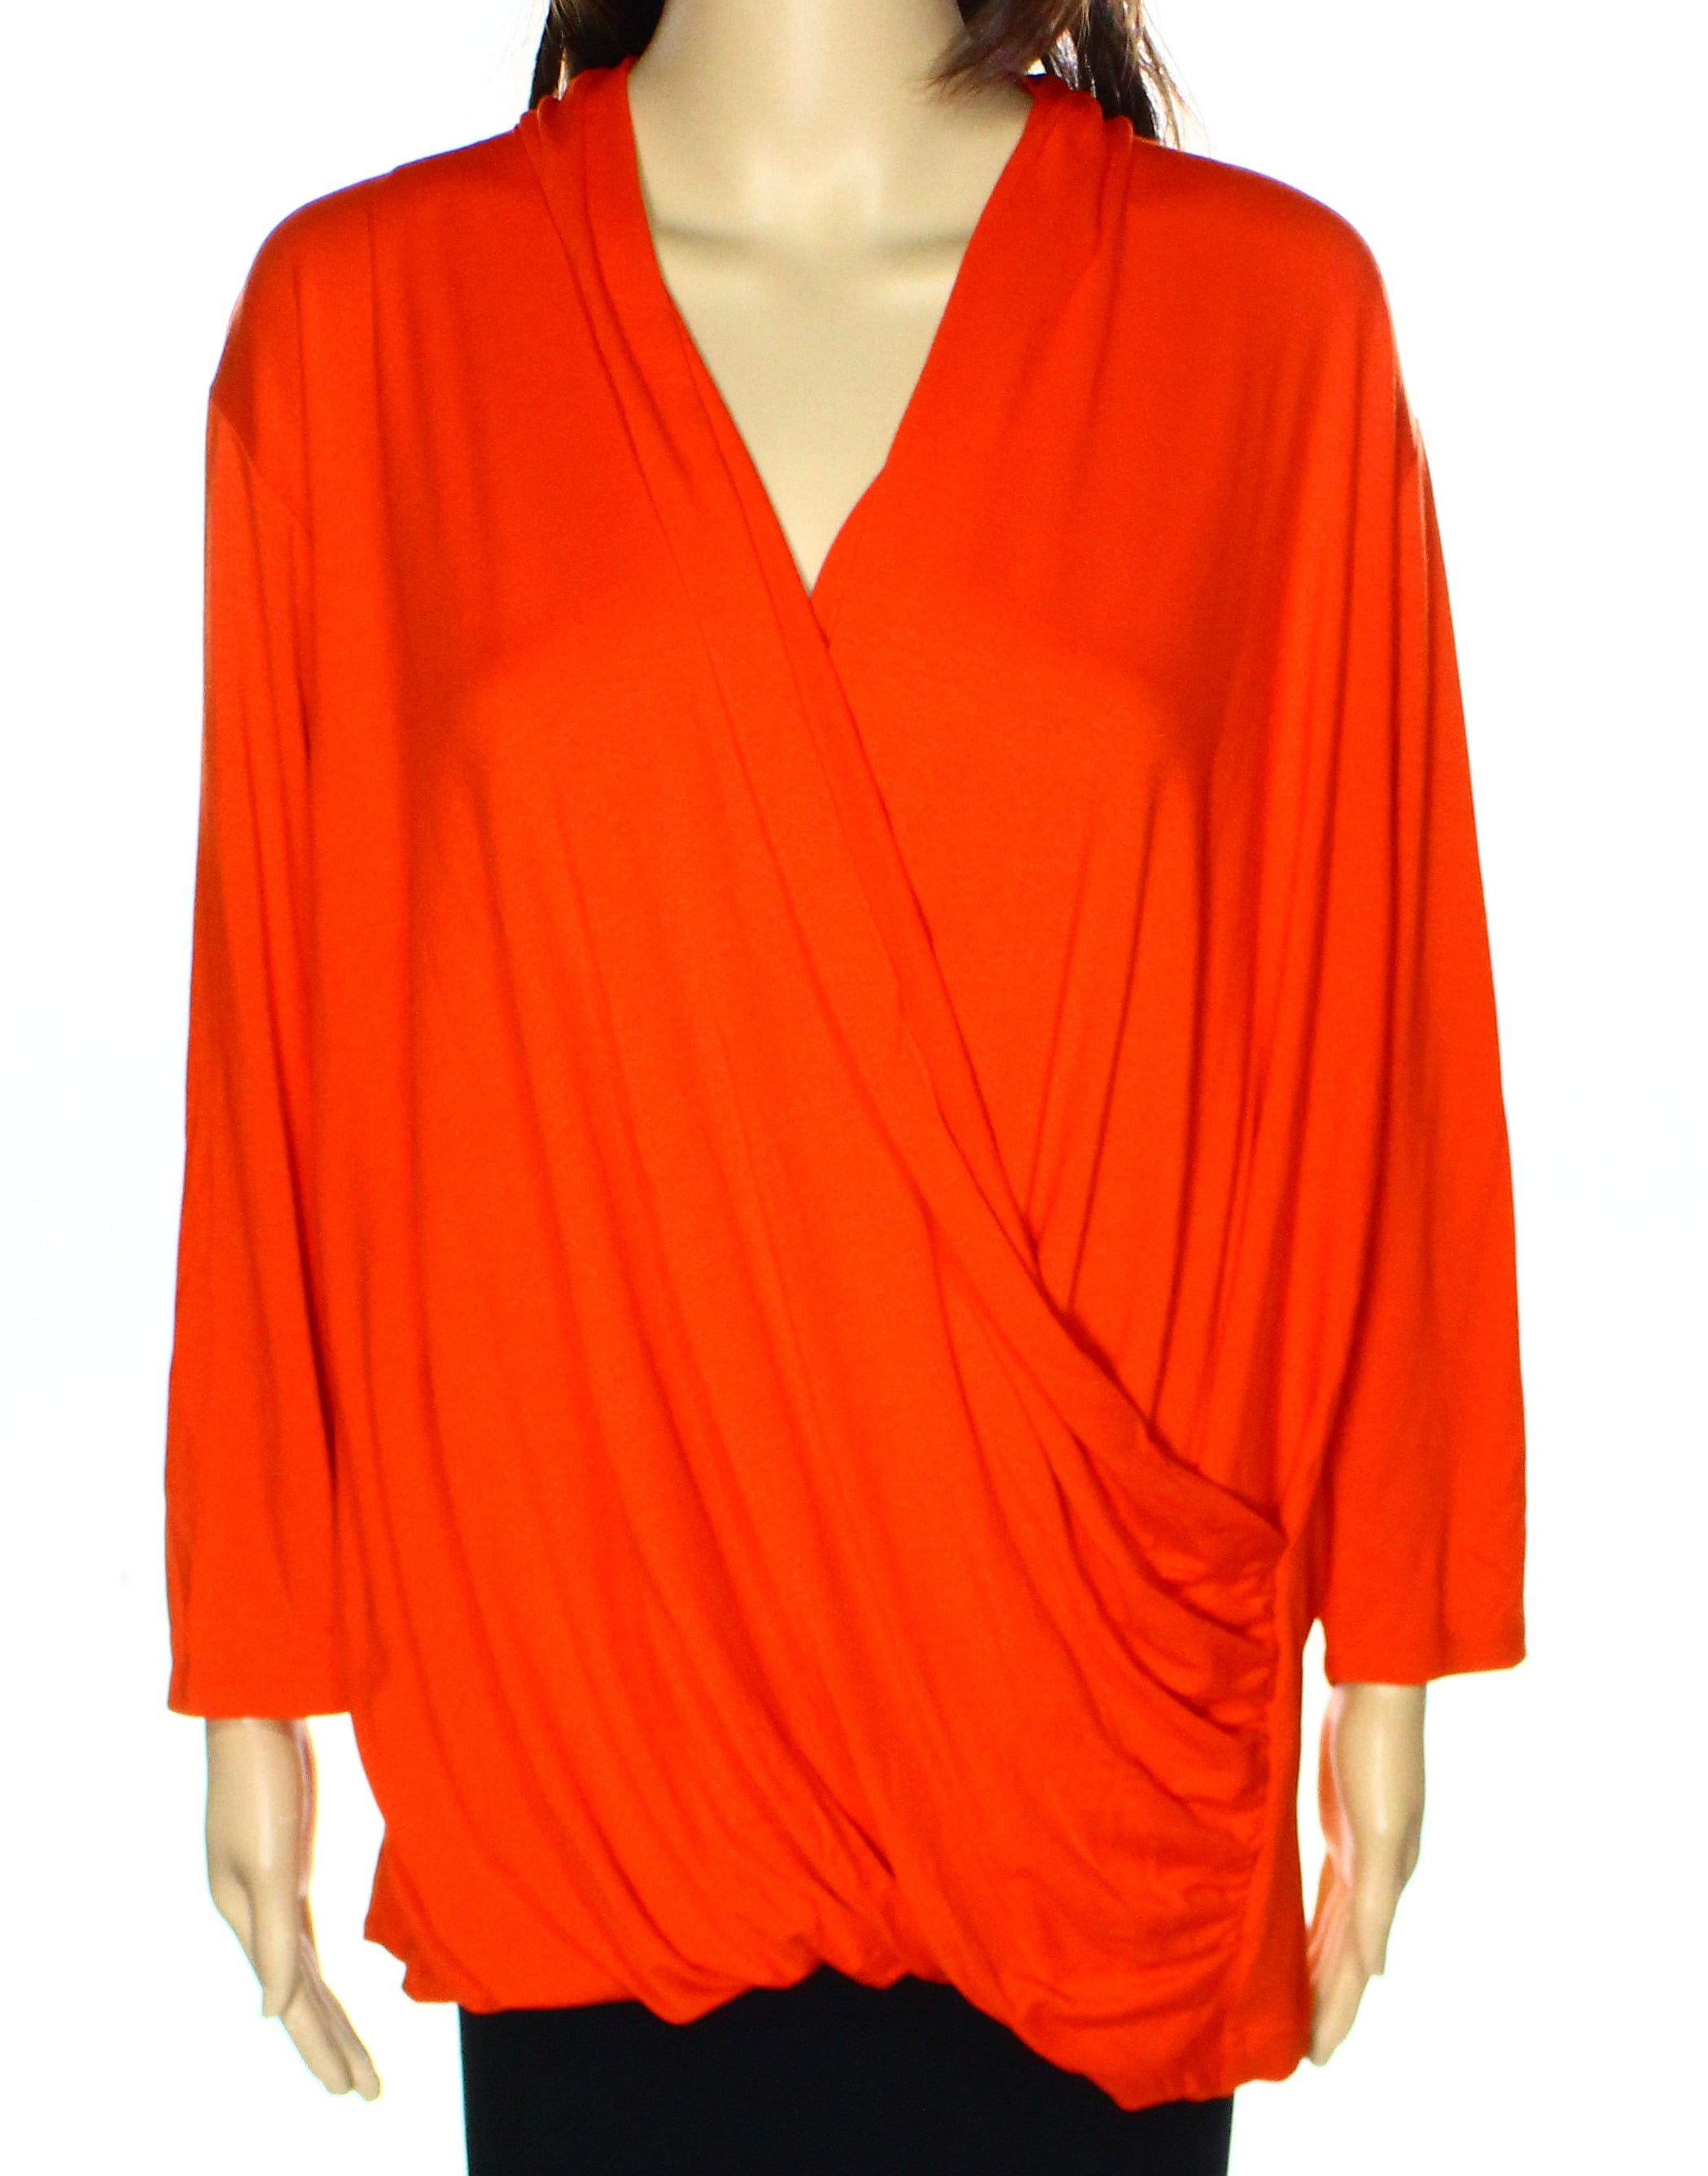 Vince Camuto - Vince Camuto NEW Bright Orange Womens Size 3X Plus ...